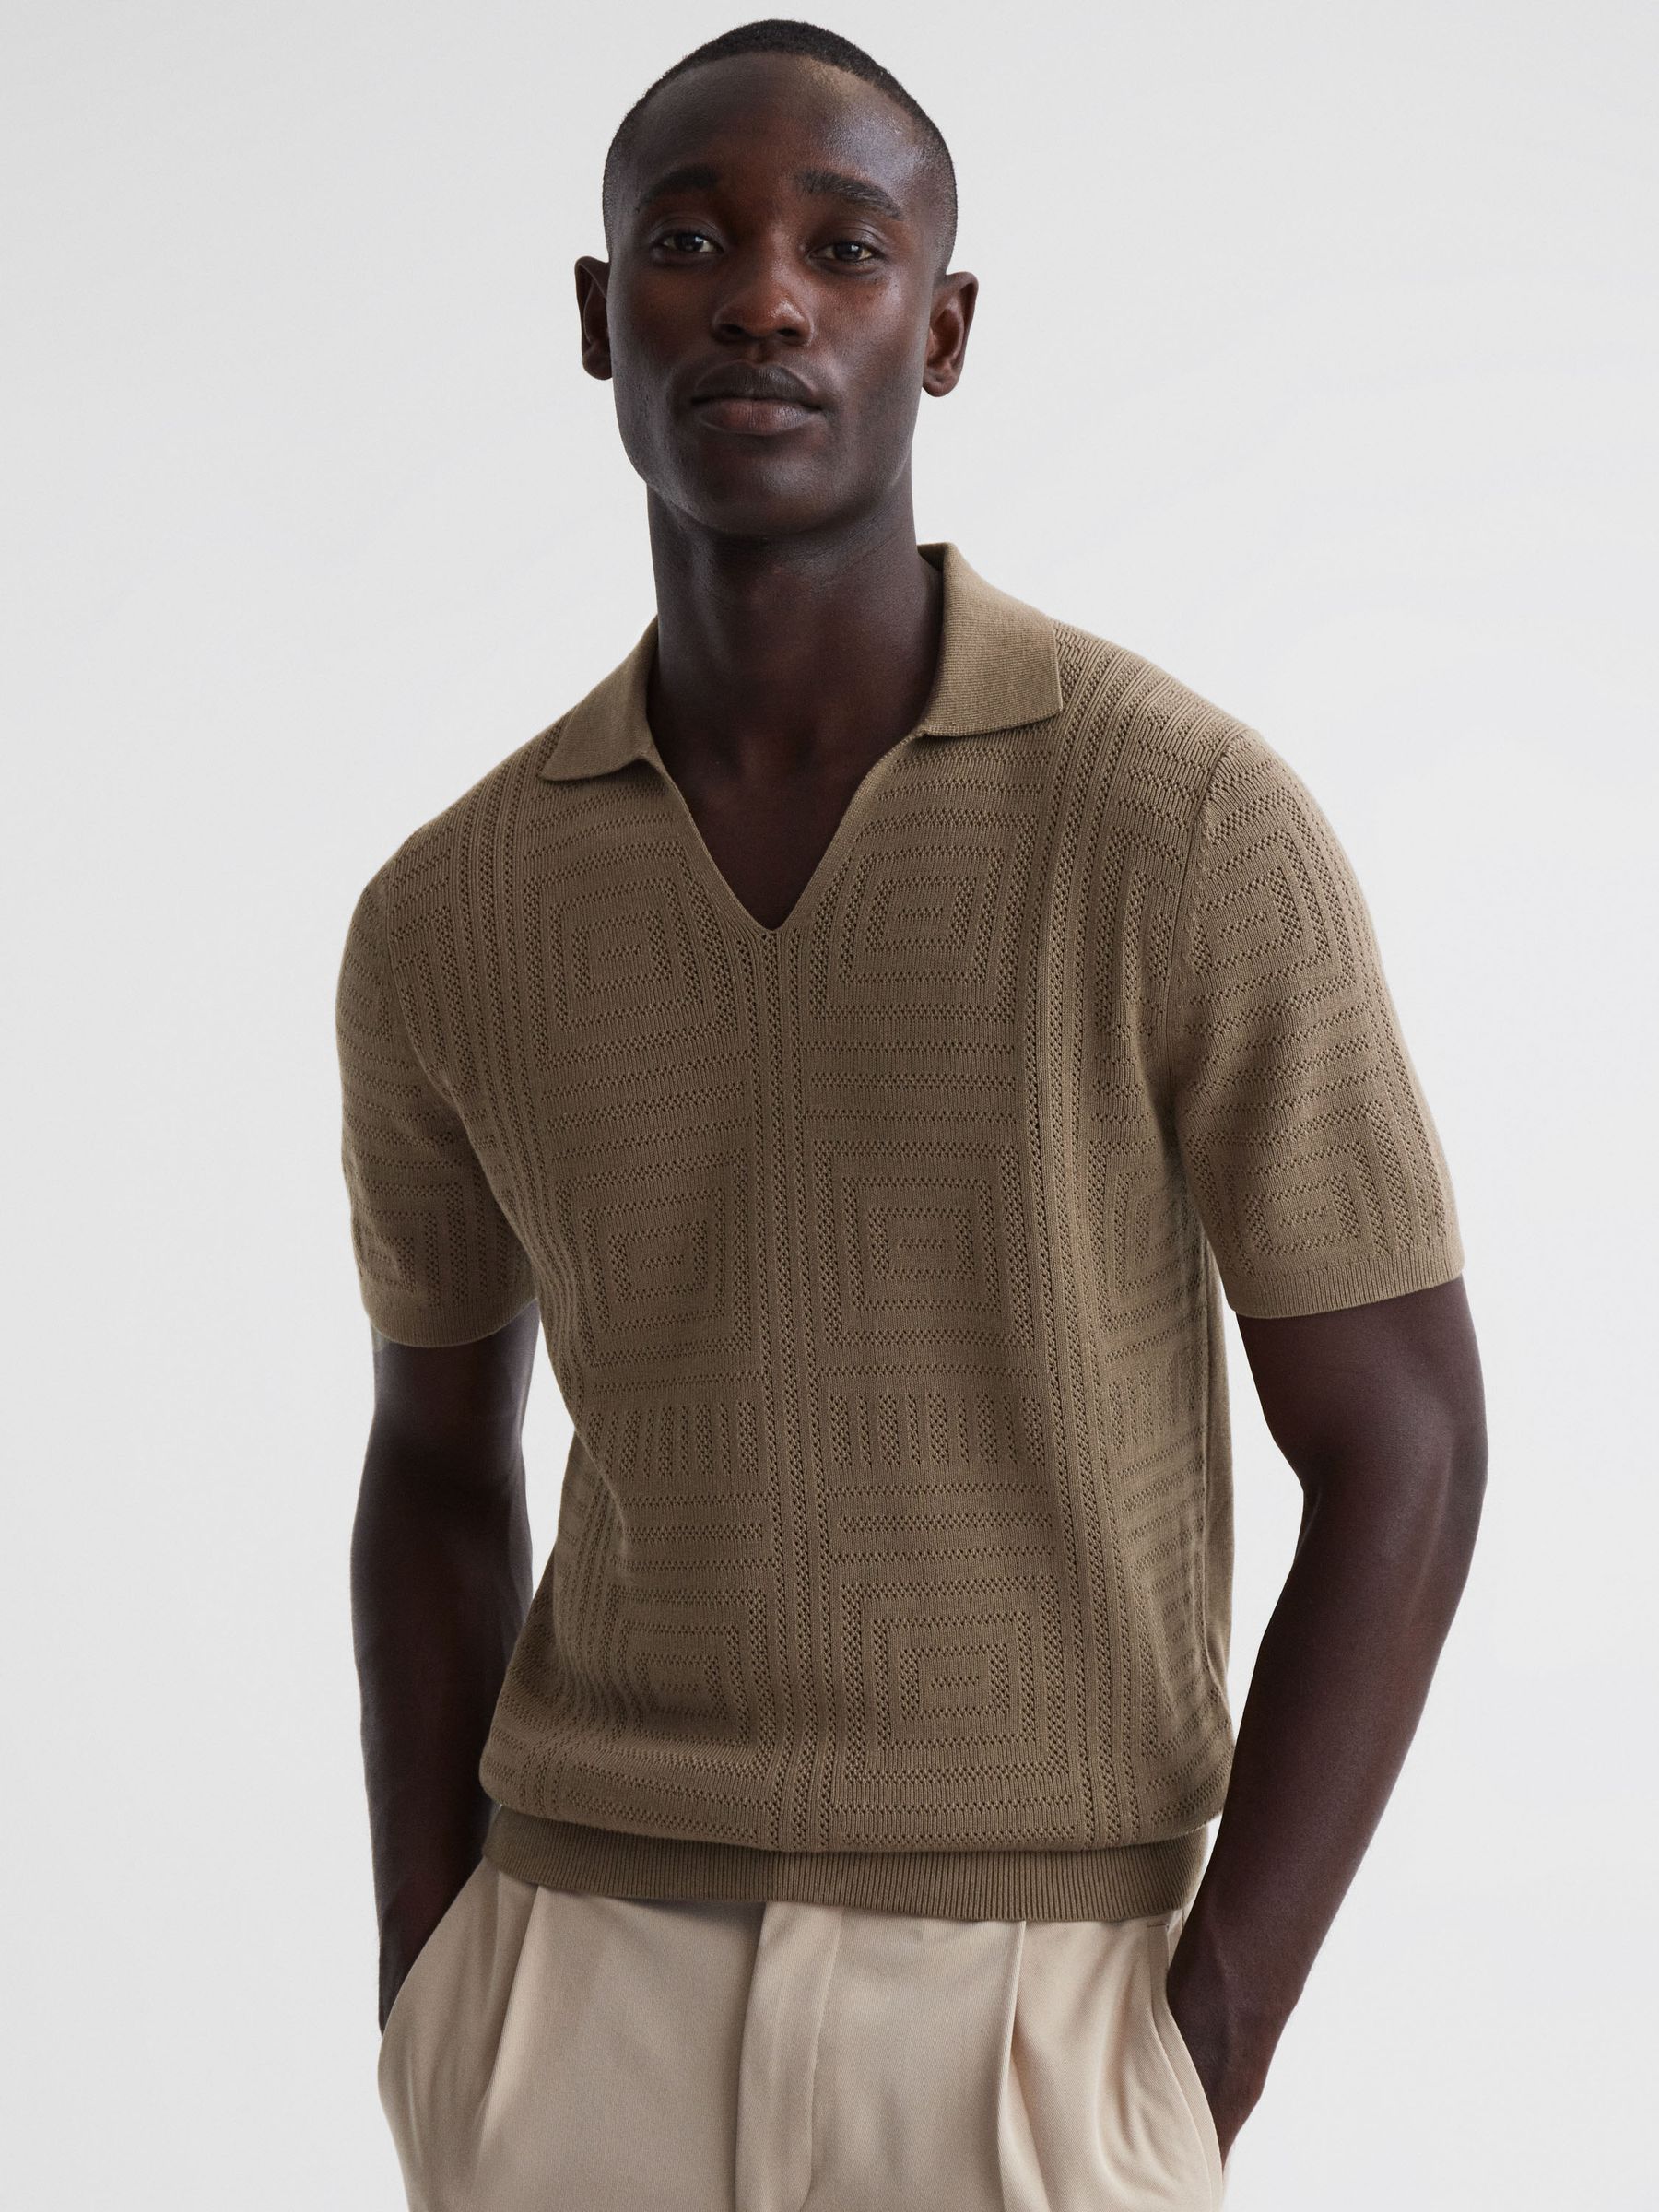 Reiss Thames Slim Fit Knitted Cotton Shirt - REISS